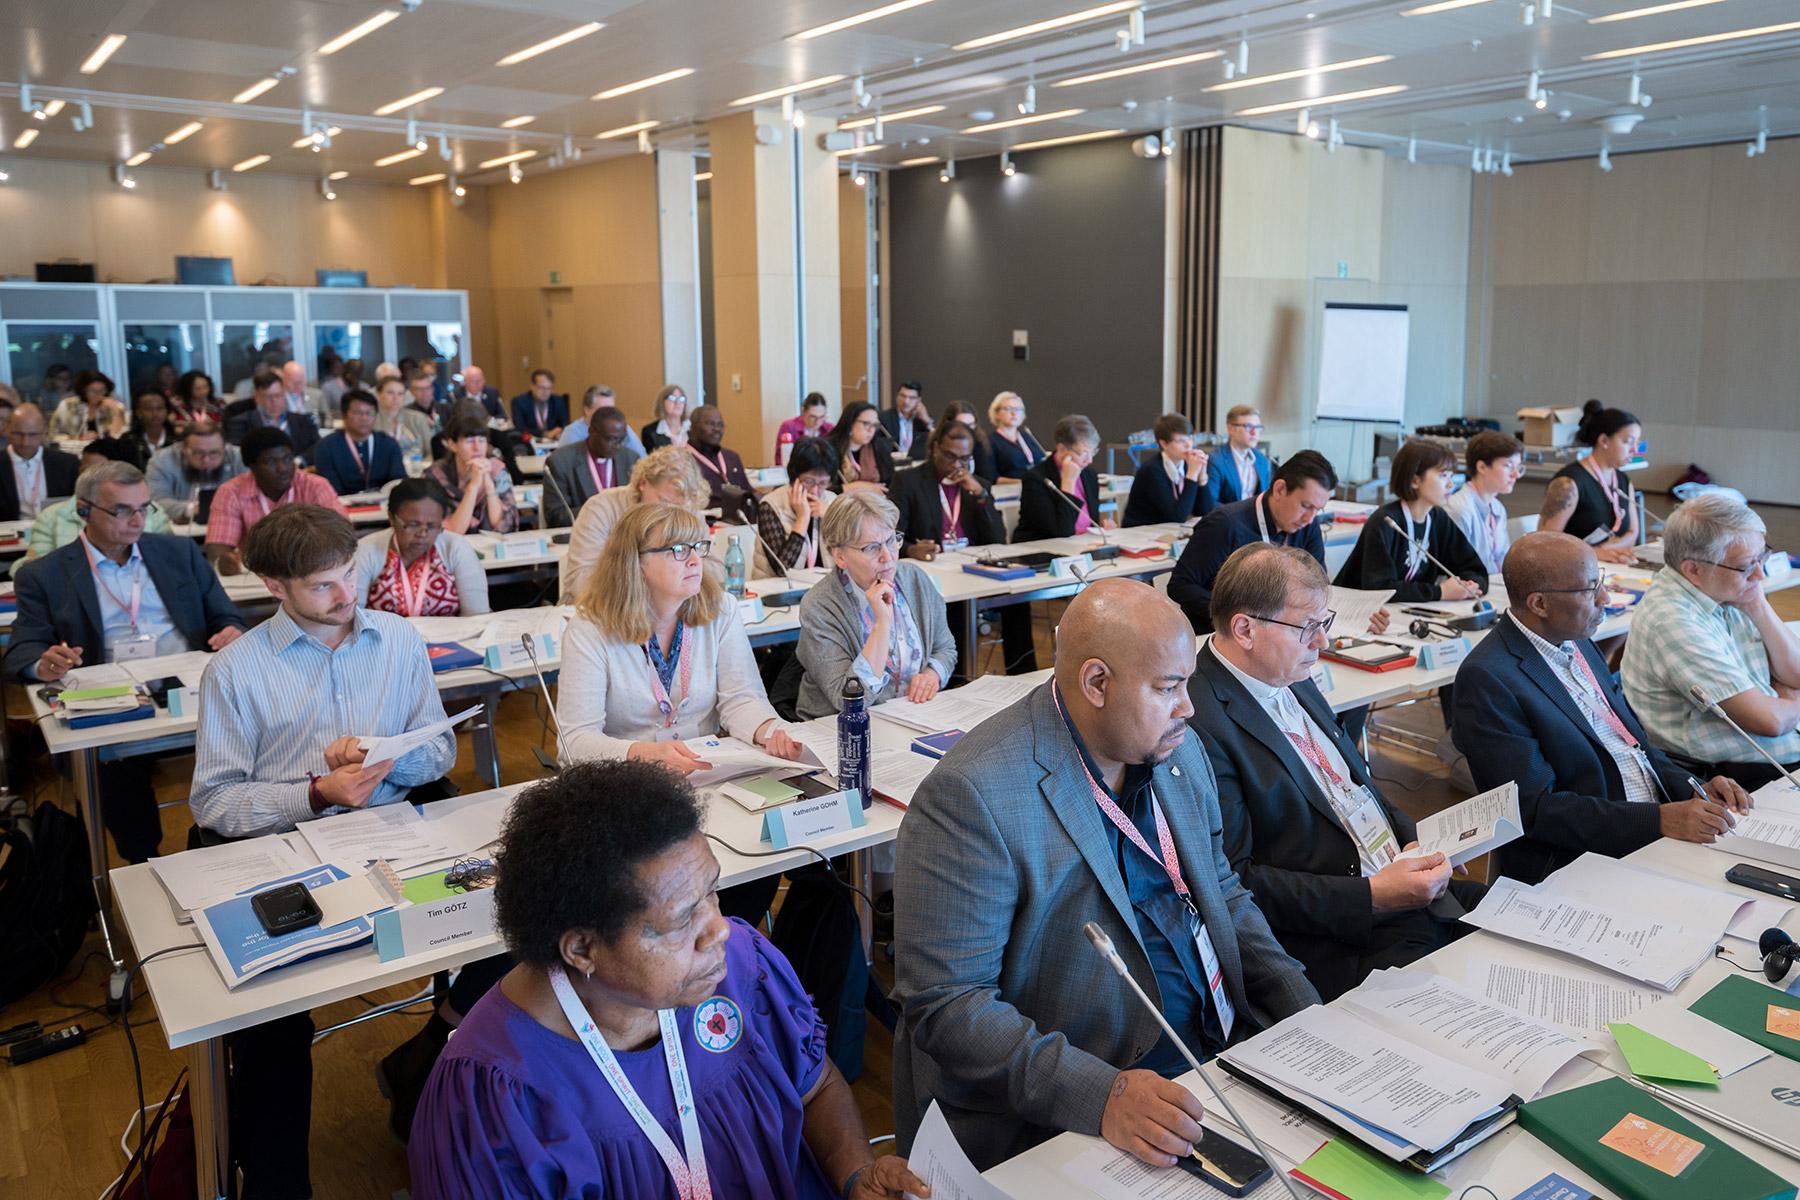 The newly LWF Council convenes for their first session following the LWF Thirteenth Assembly. Photo: LWF/Albin Hillert